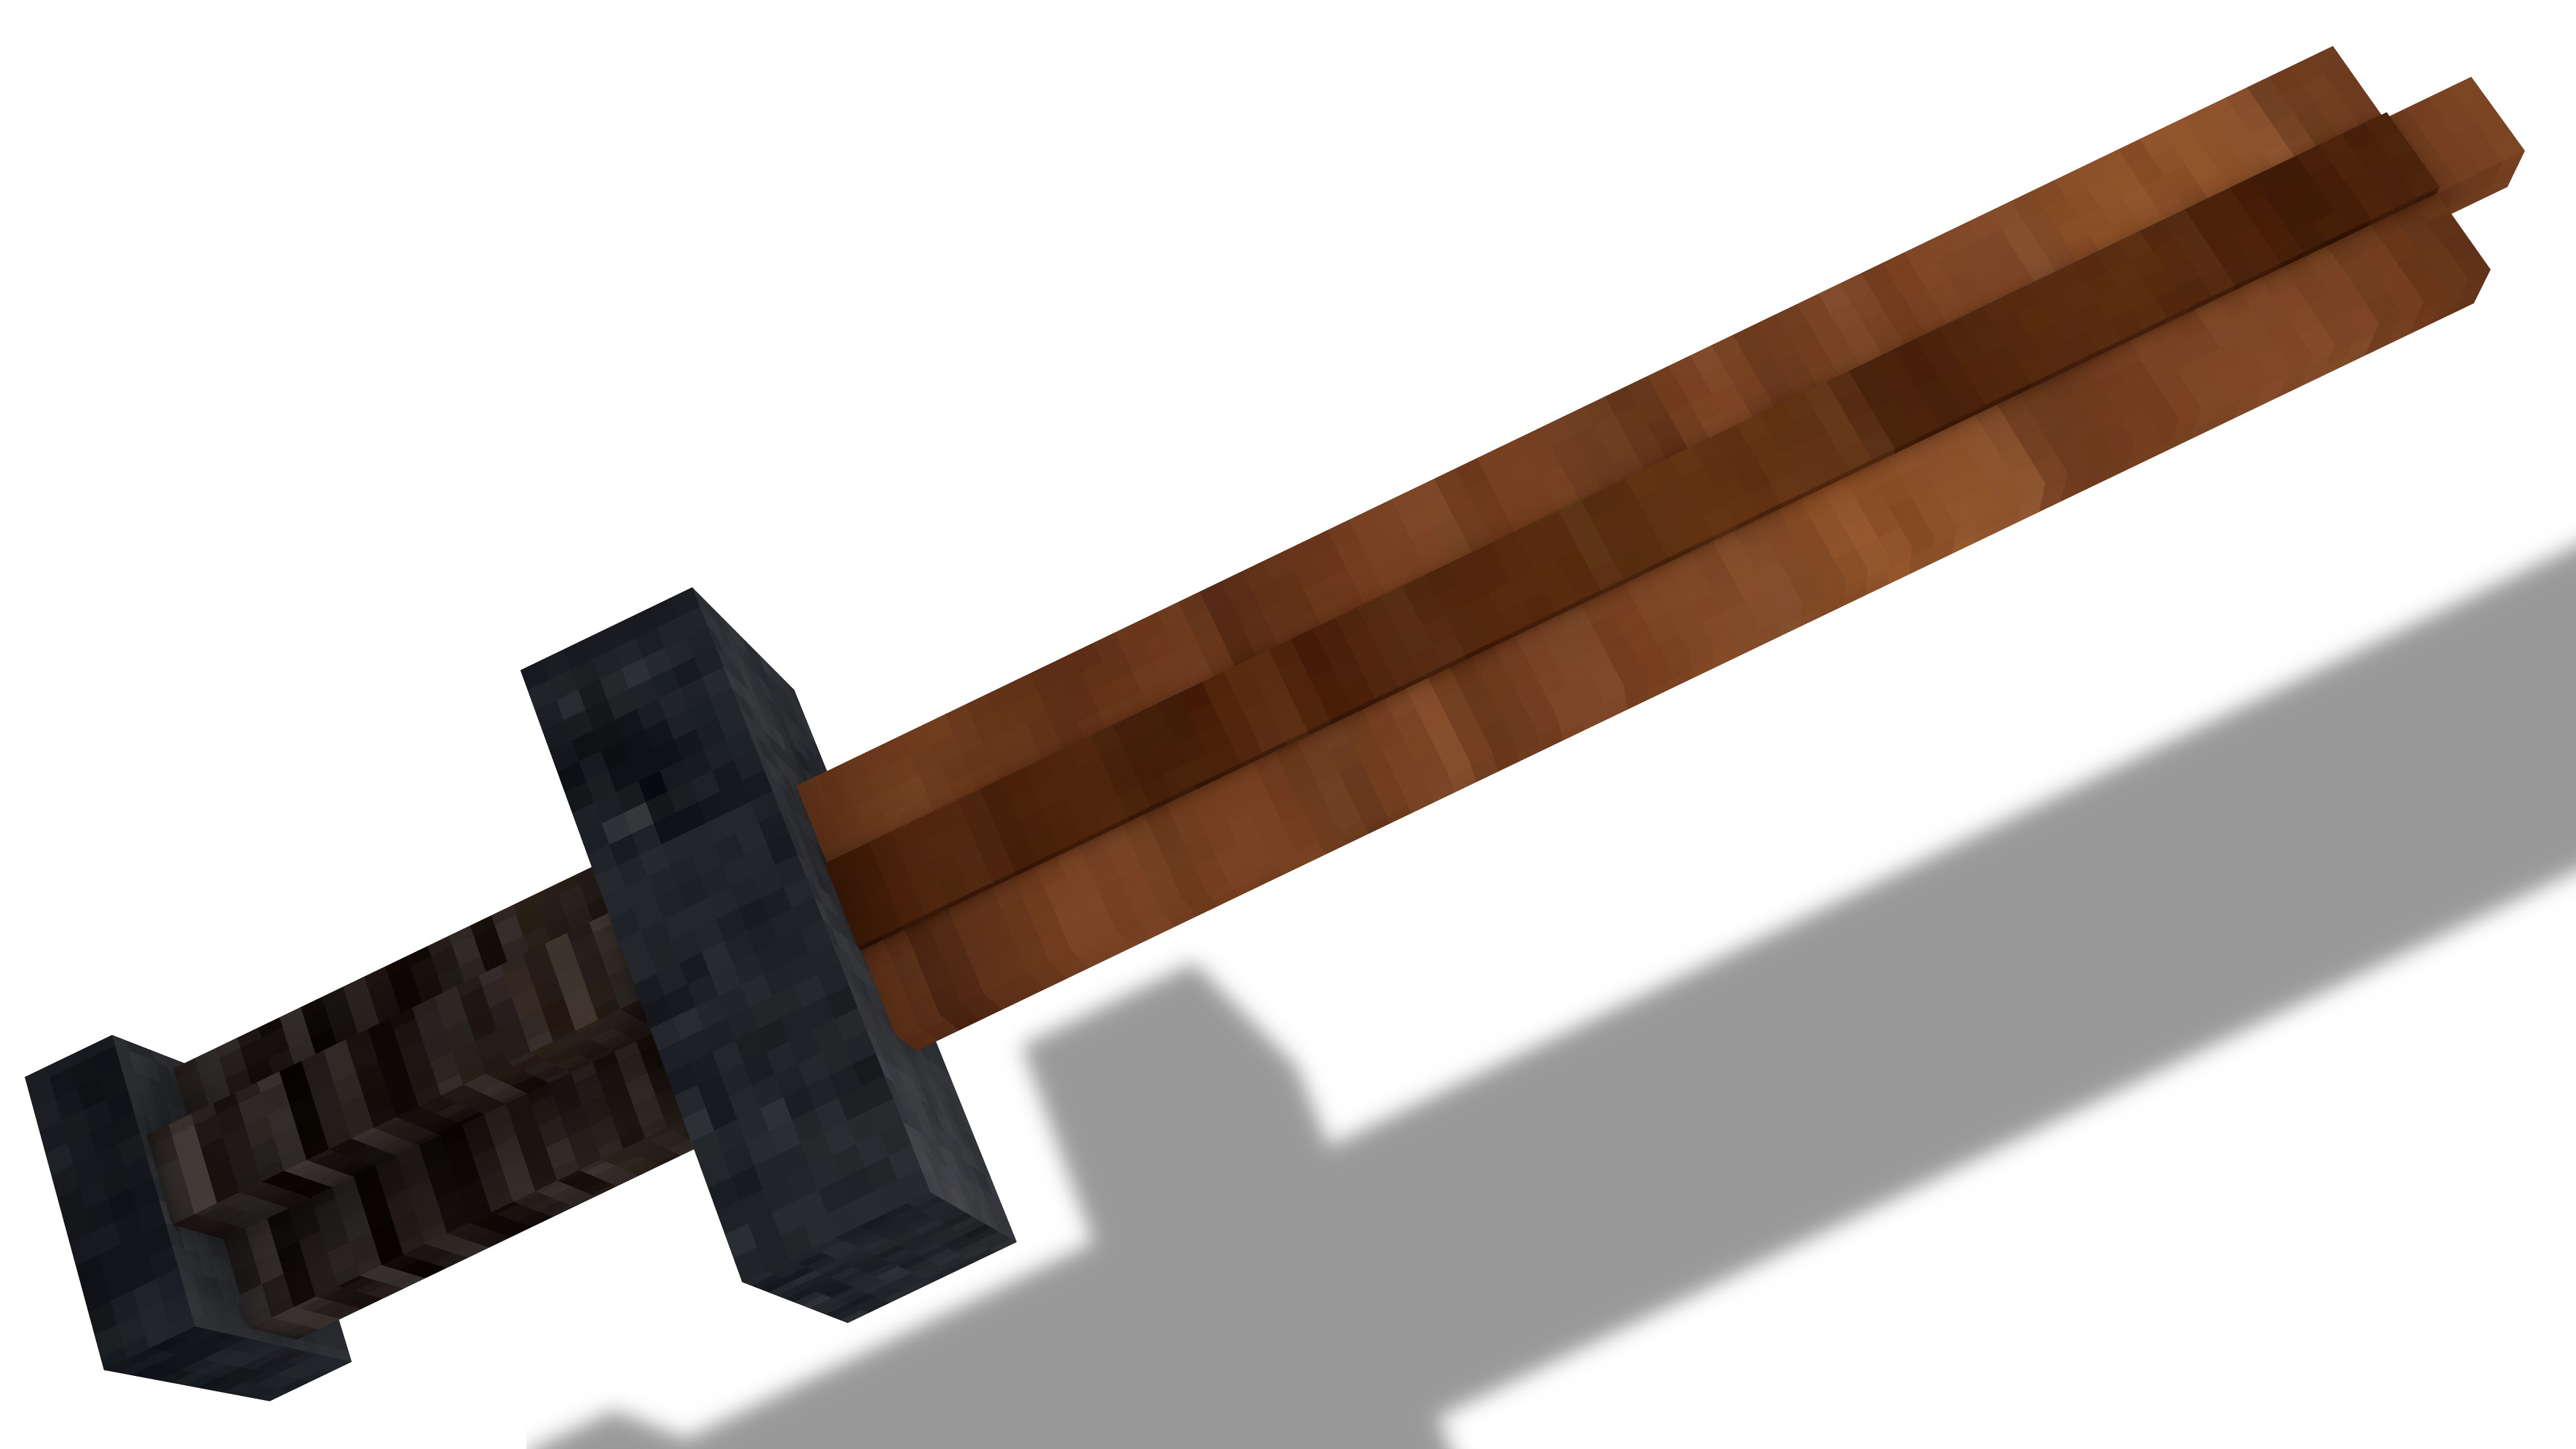 Images - 3D Swords Pack - Texture Packs - Projects - Minecraft CurseForge